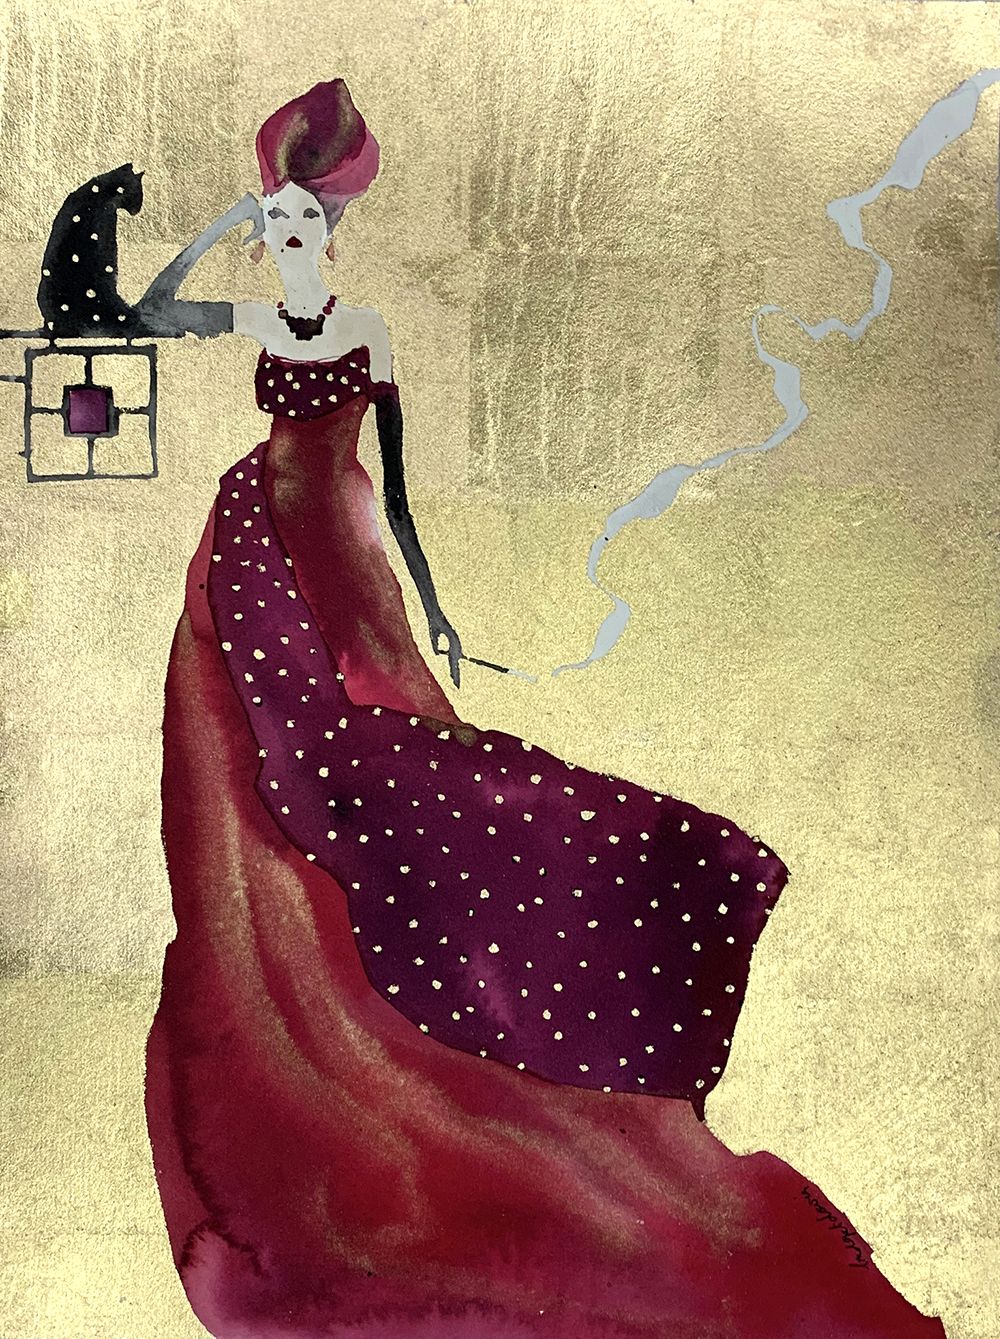 The Smoking Lady and Her Spotty Cat by Bridget Davies